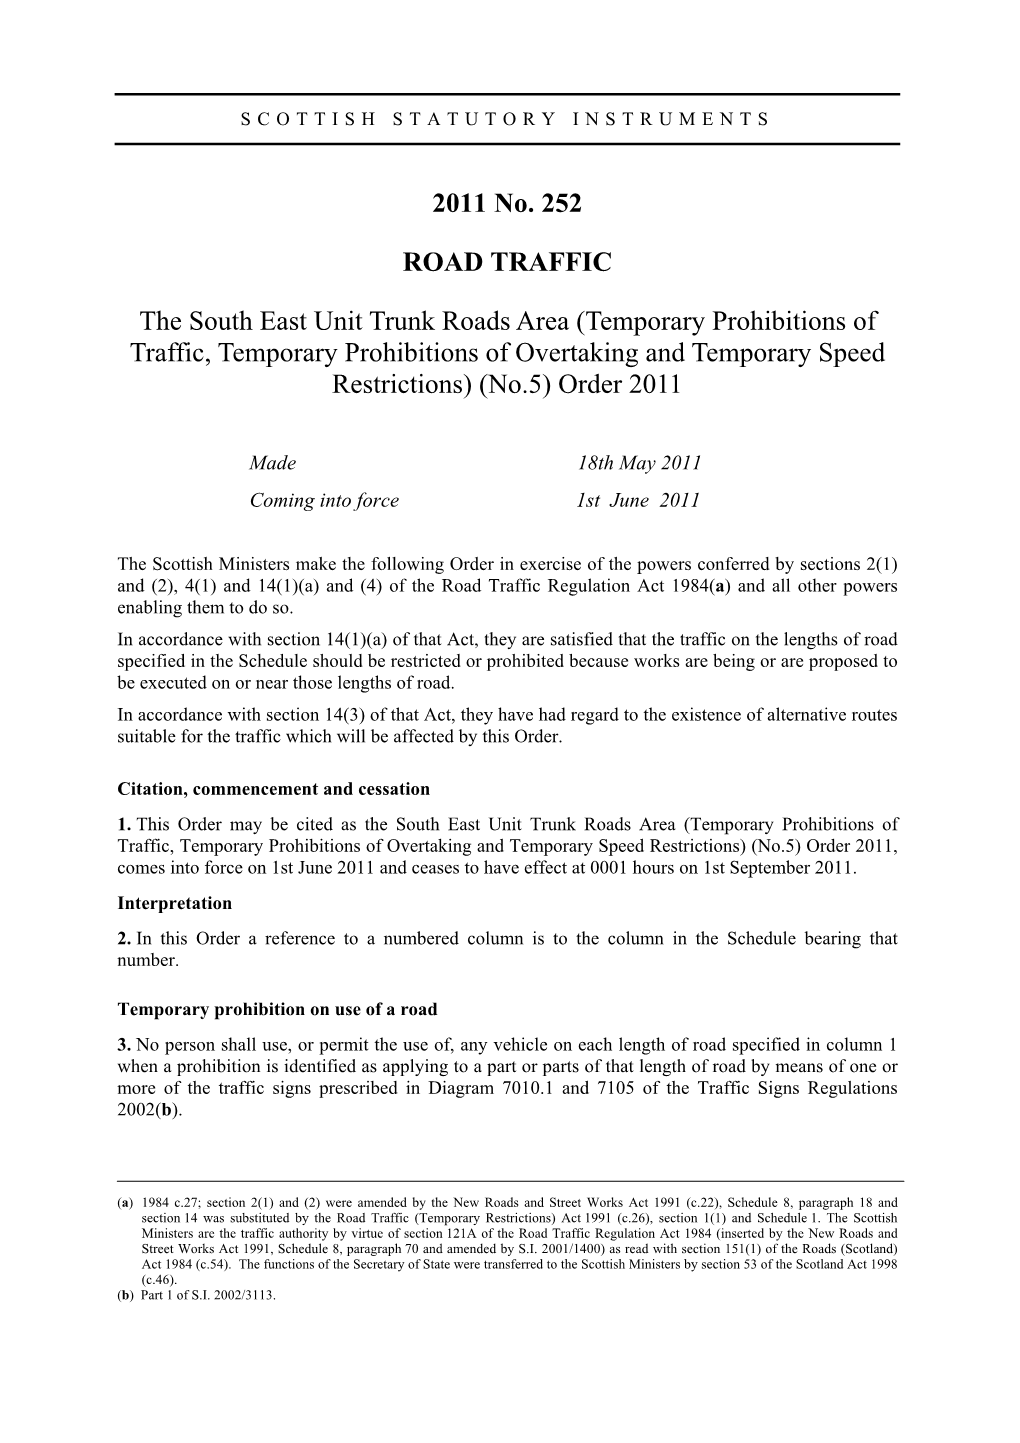 2011 No. 252 ROAD TRAFFIC the South East